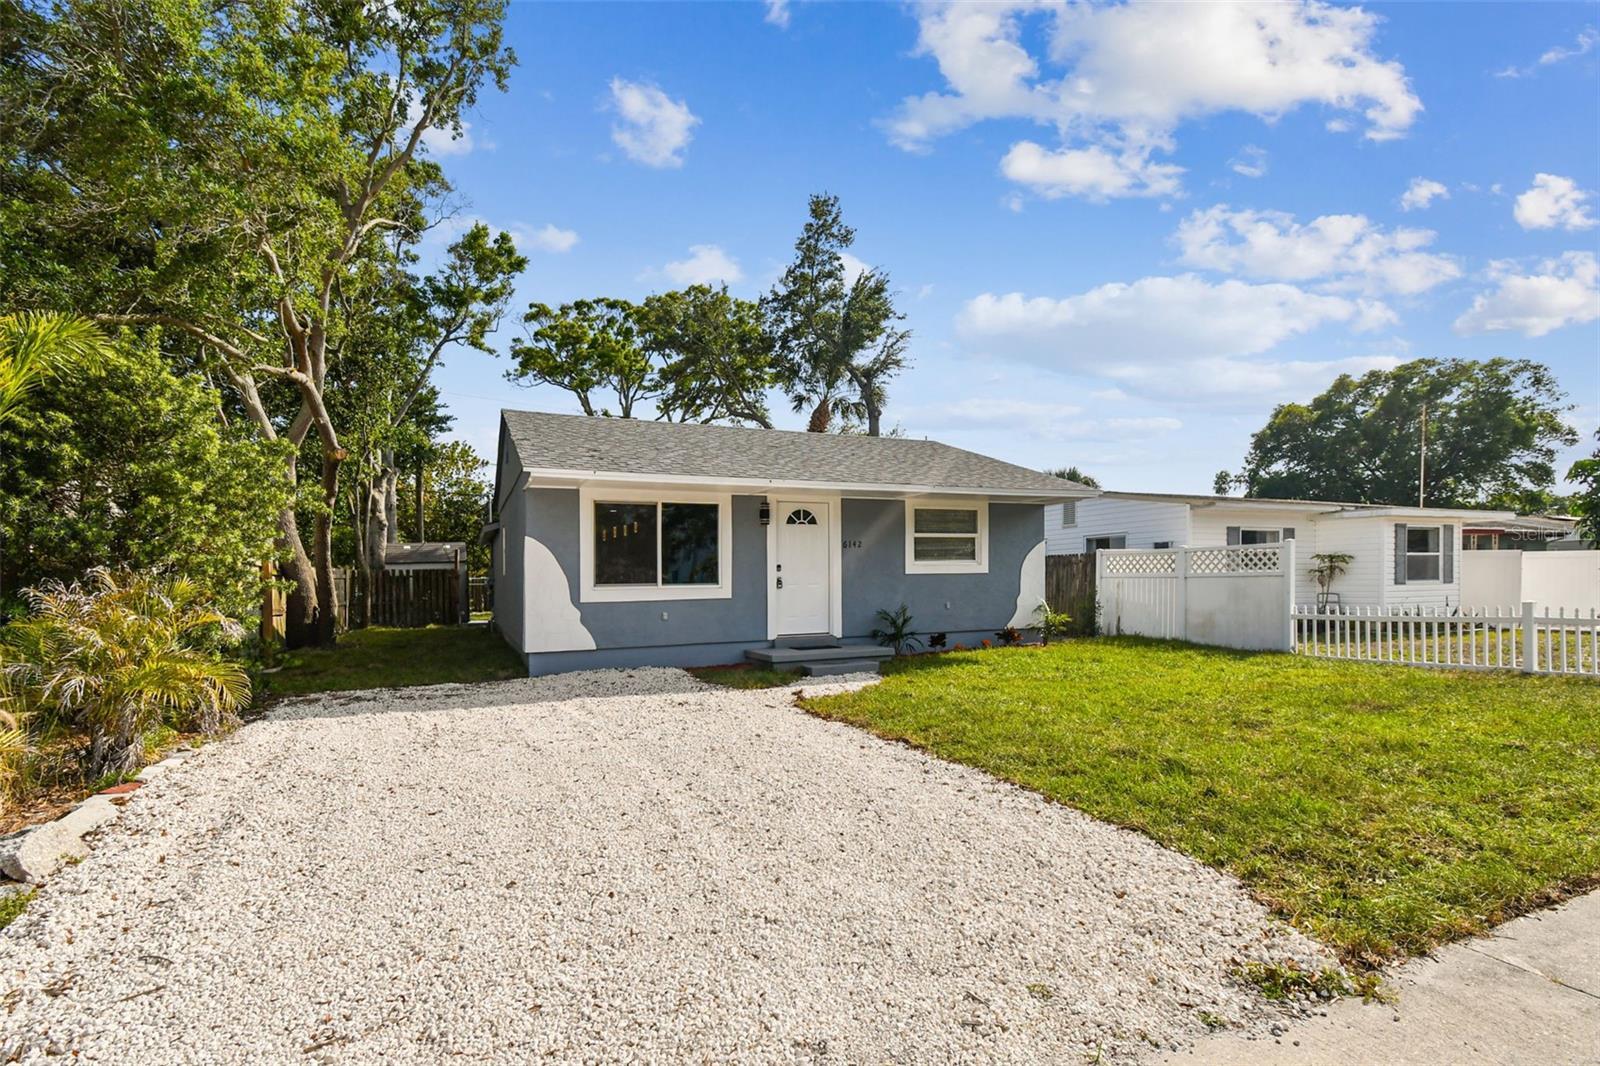 Photo one of 6142 4Th S Ave St Petersburg FL 33707 | MLS T3516056